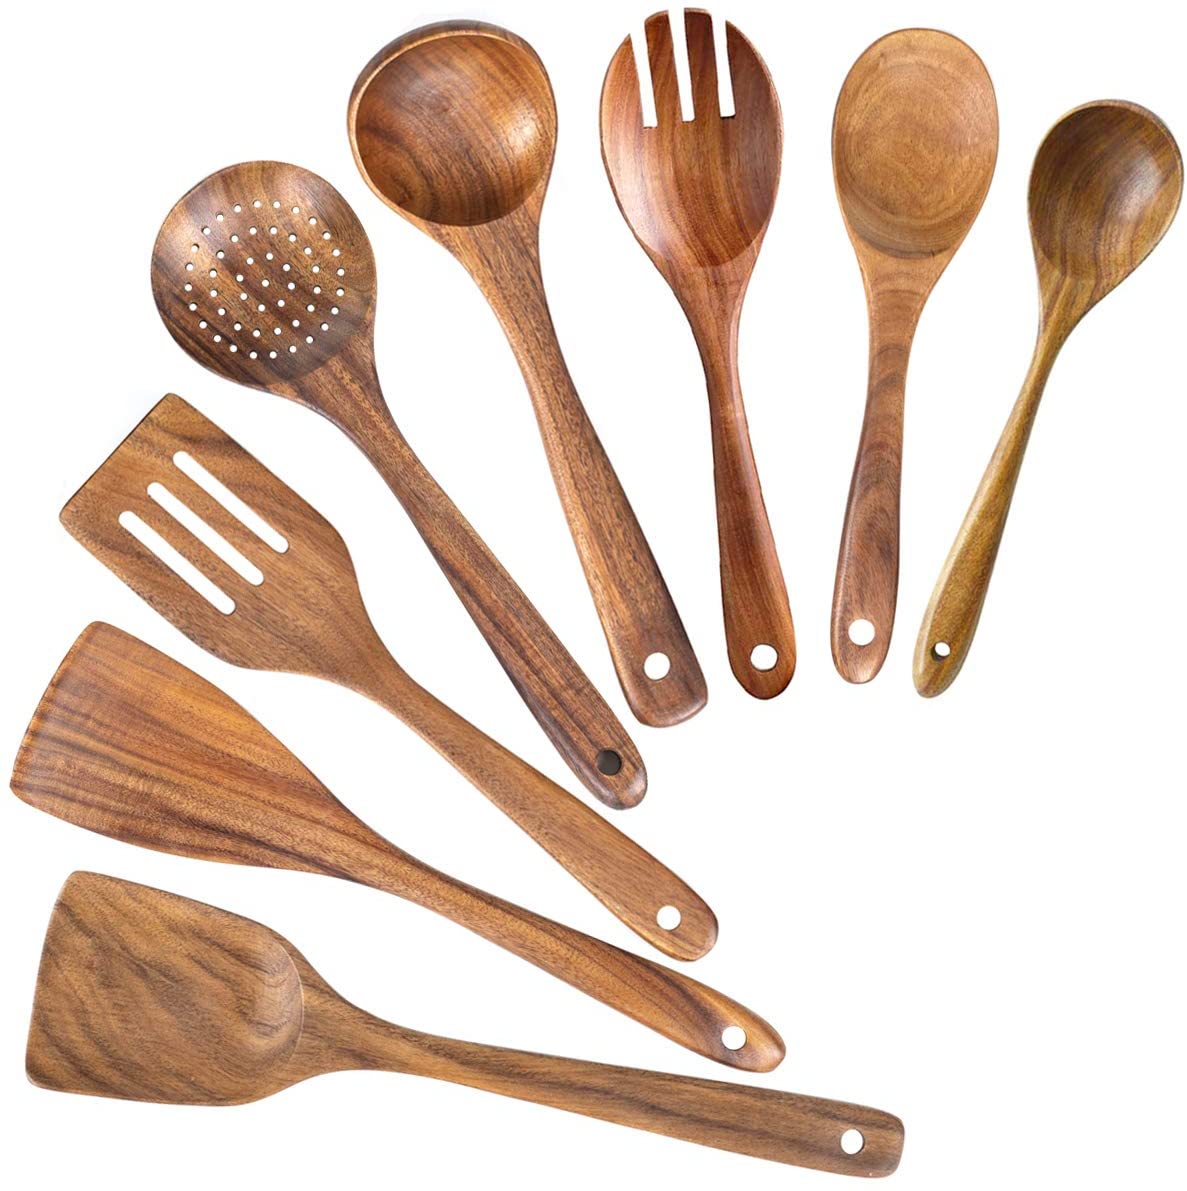 Wooden Spoons for Cooking Nonstick Kitchen Utensil Set